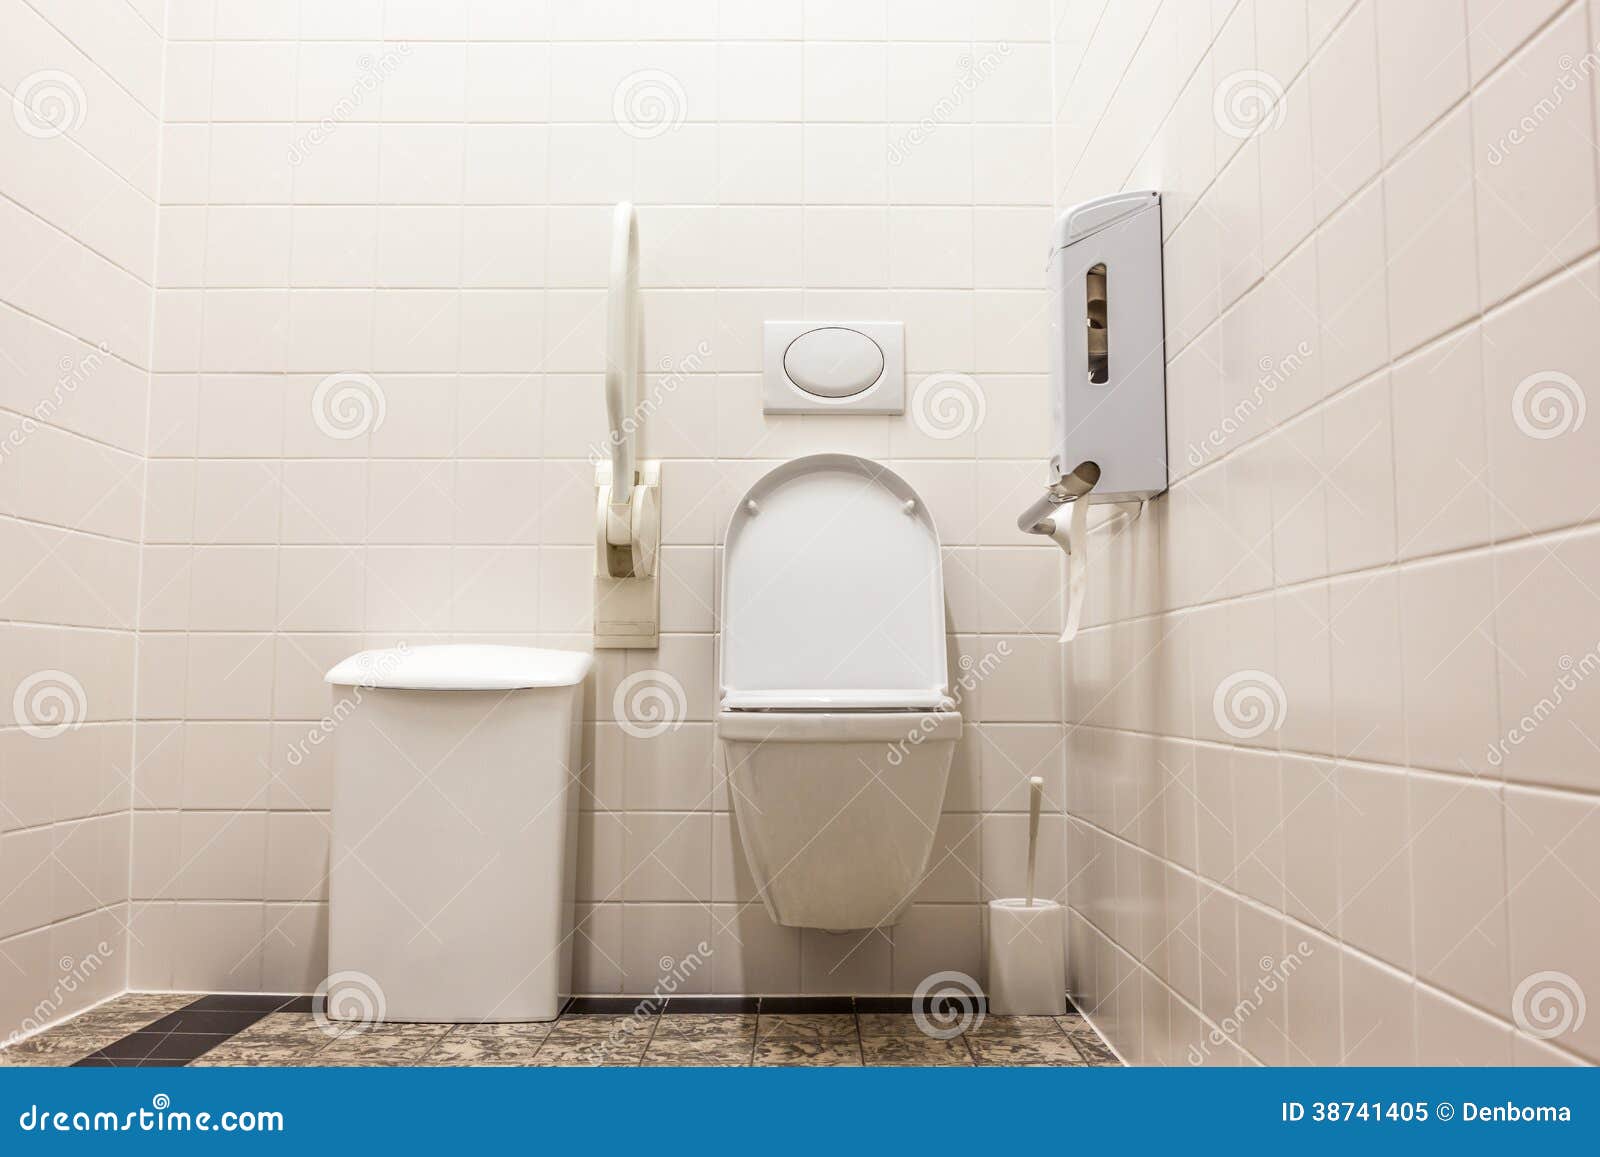 Urinal And Toilet Stock Image Image Of Disabled Lavatory